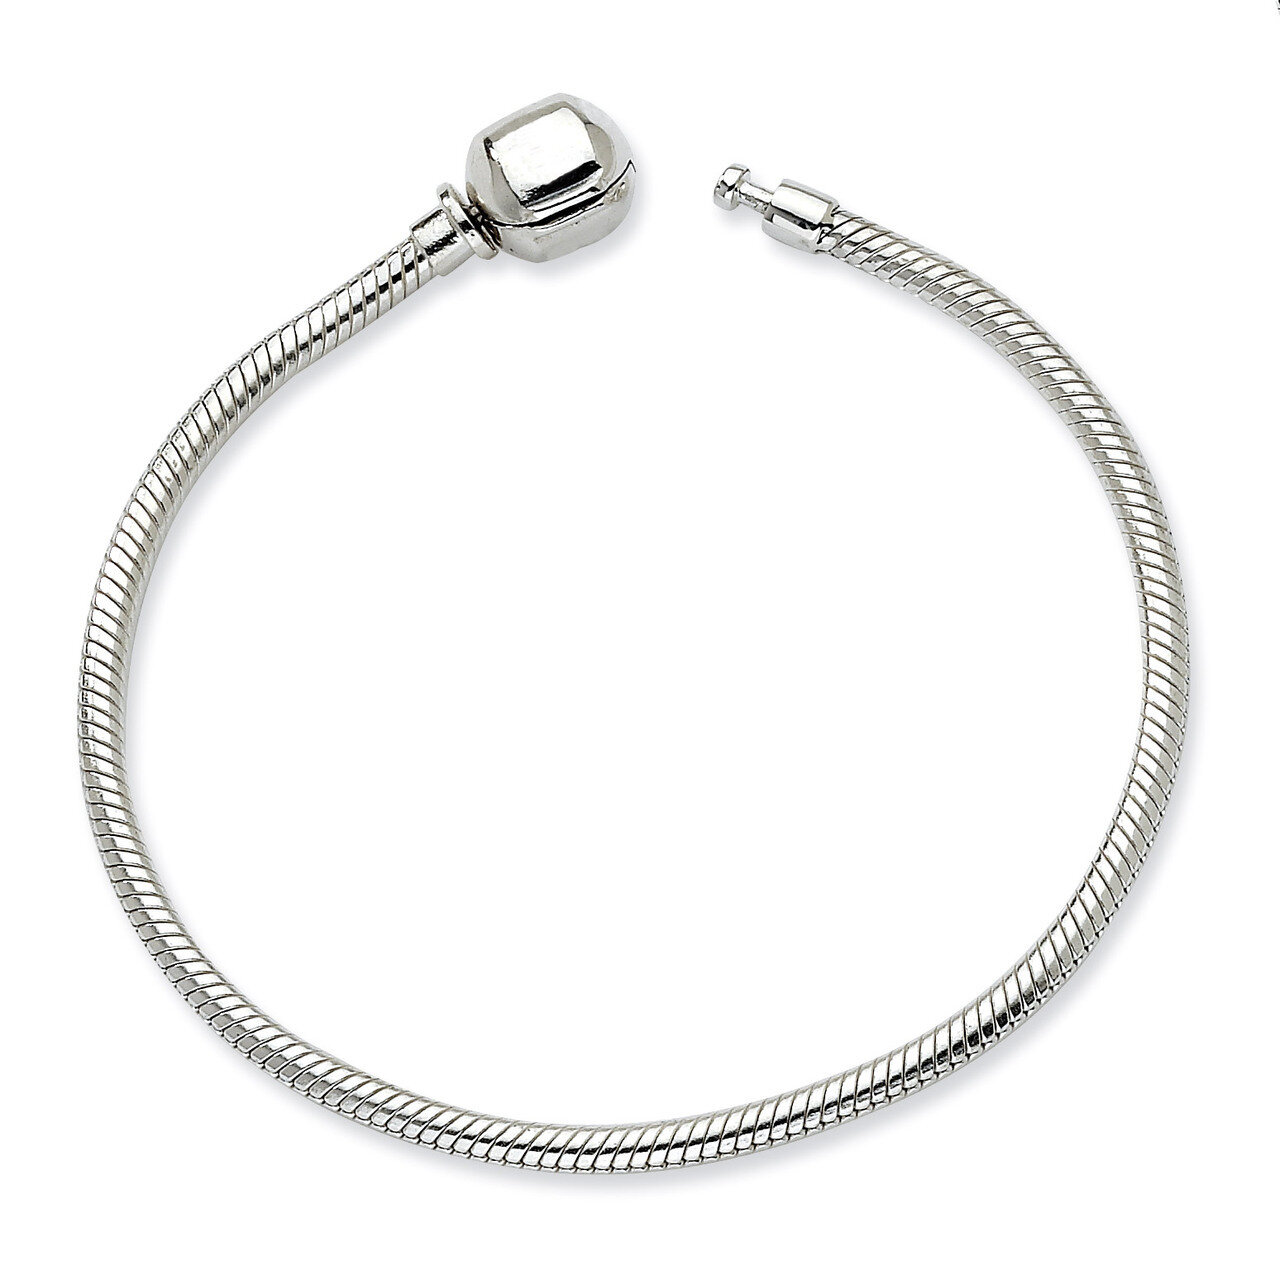 8.5 Inch Hinged Clasp Bead Bracelet - Sterling Silver QRS985-8.5